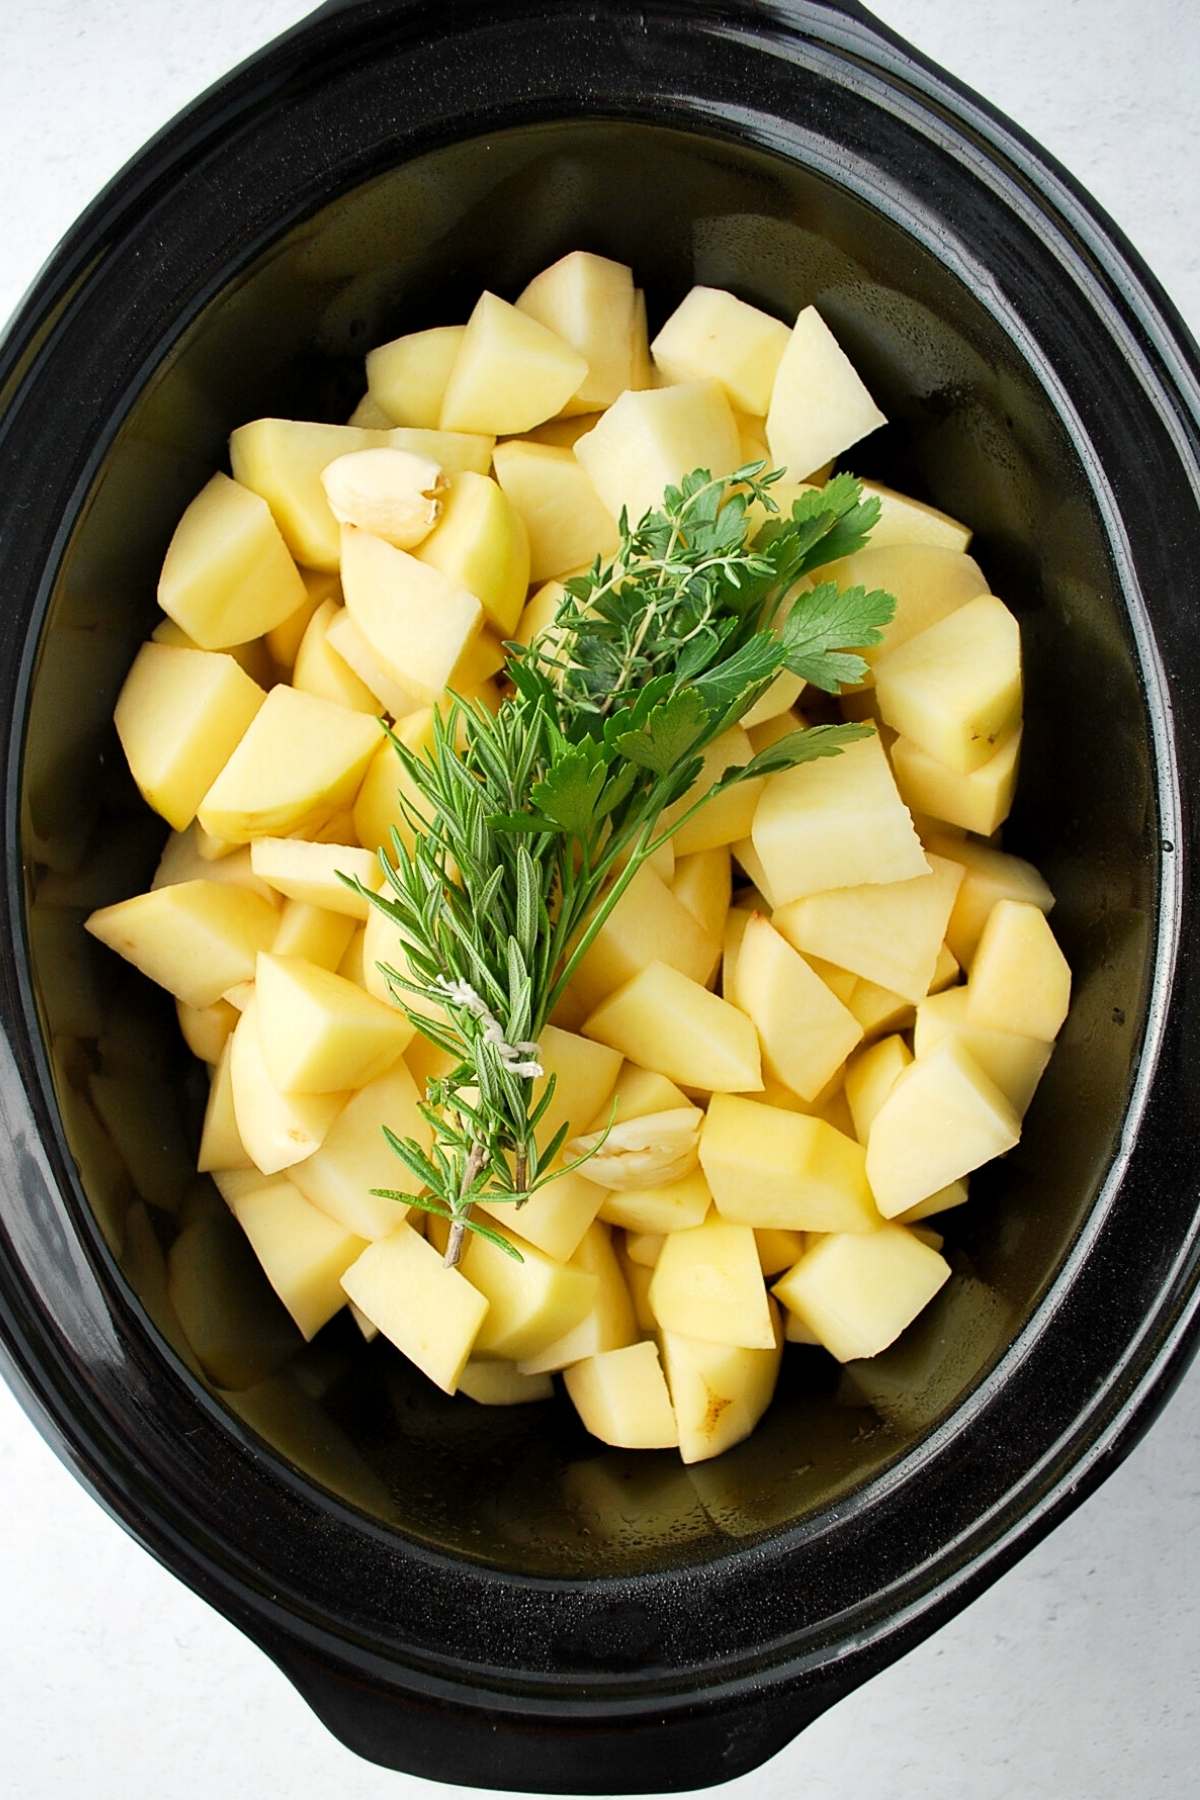 chopped potatoes and a bundle of herbs in a slow cooker insert